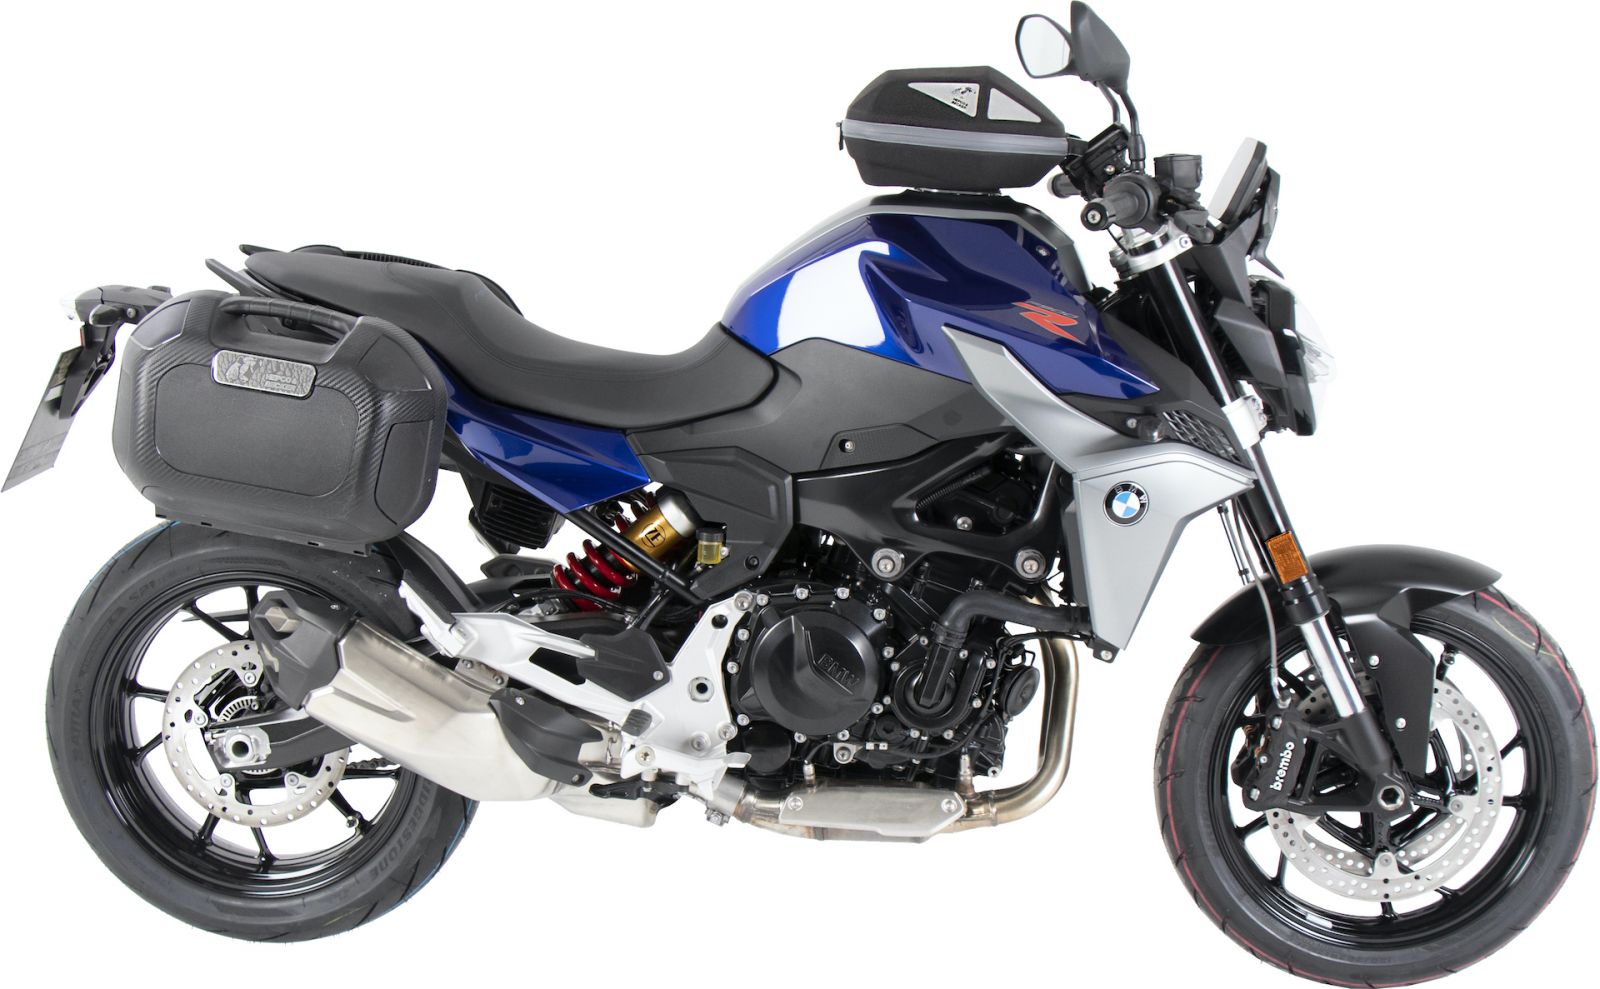 BMW F900 R 2020 onwards fitted out with Hepco&Becker accessories. Luggage, Crash Bars, Tank Bags. Made in Germany. Great quality at great prices. At Motorcycle Adventure Products.